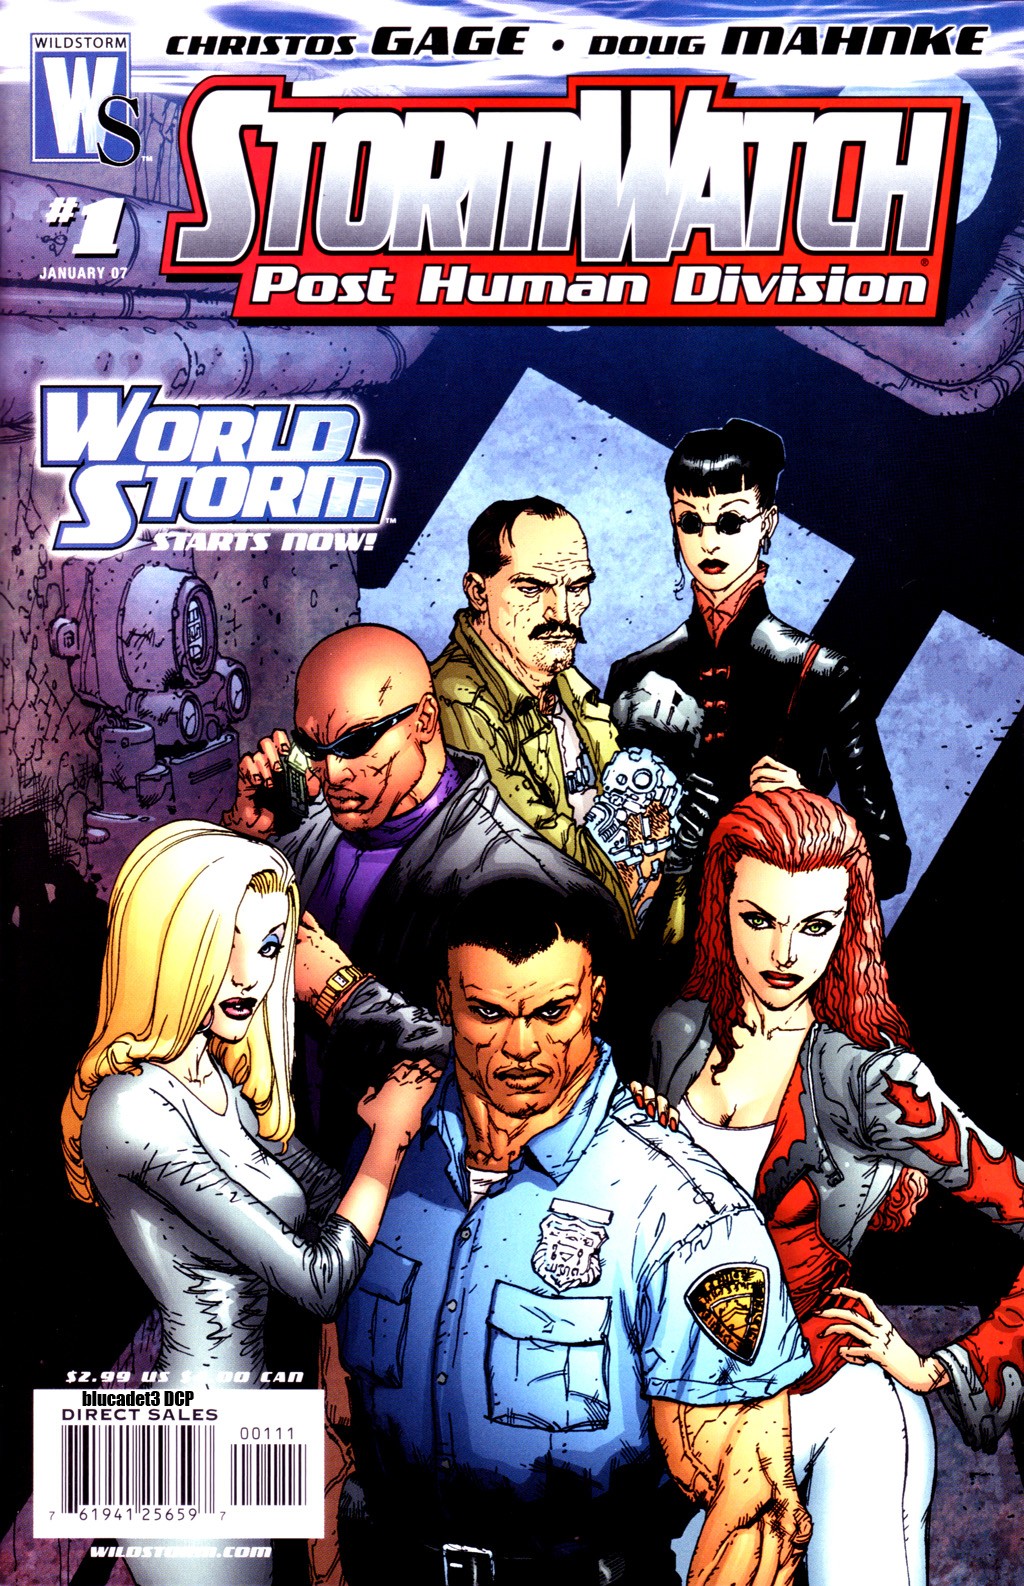 Stormwatch: Post Human Division Vol. 1 #1